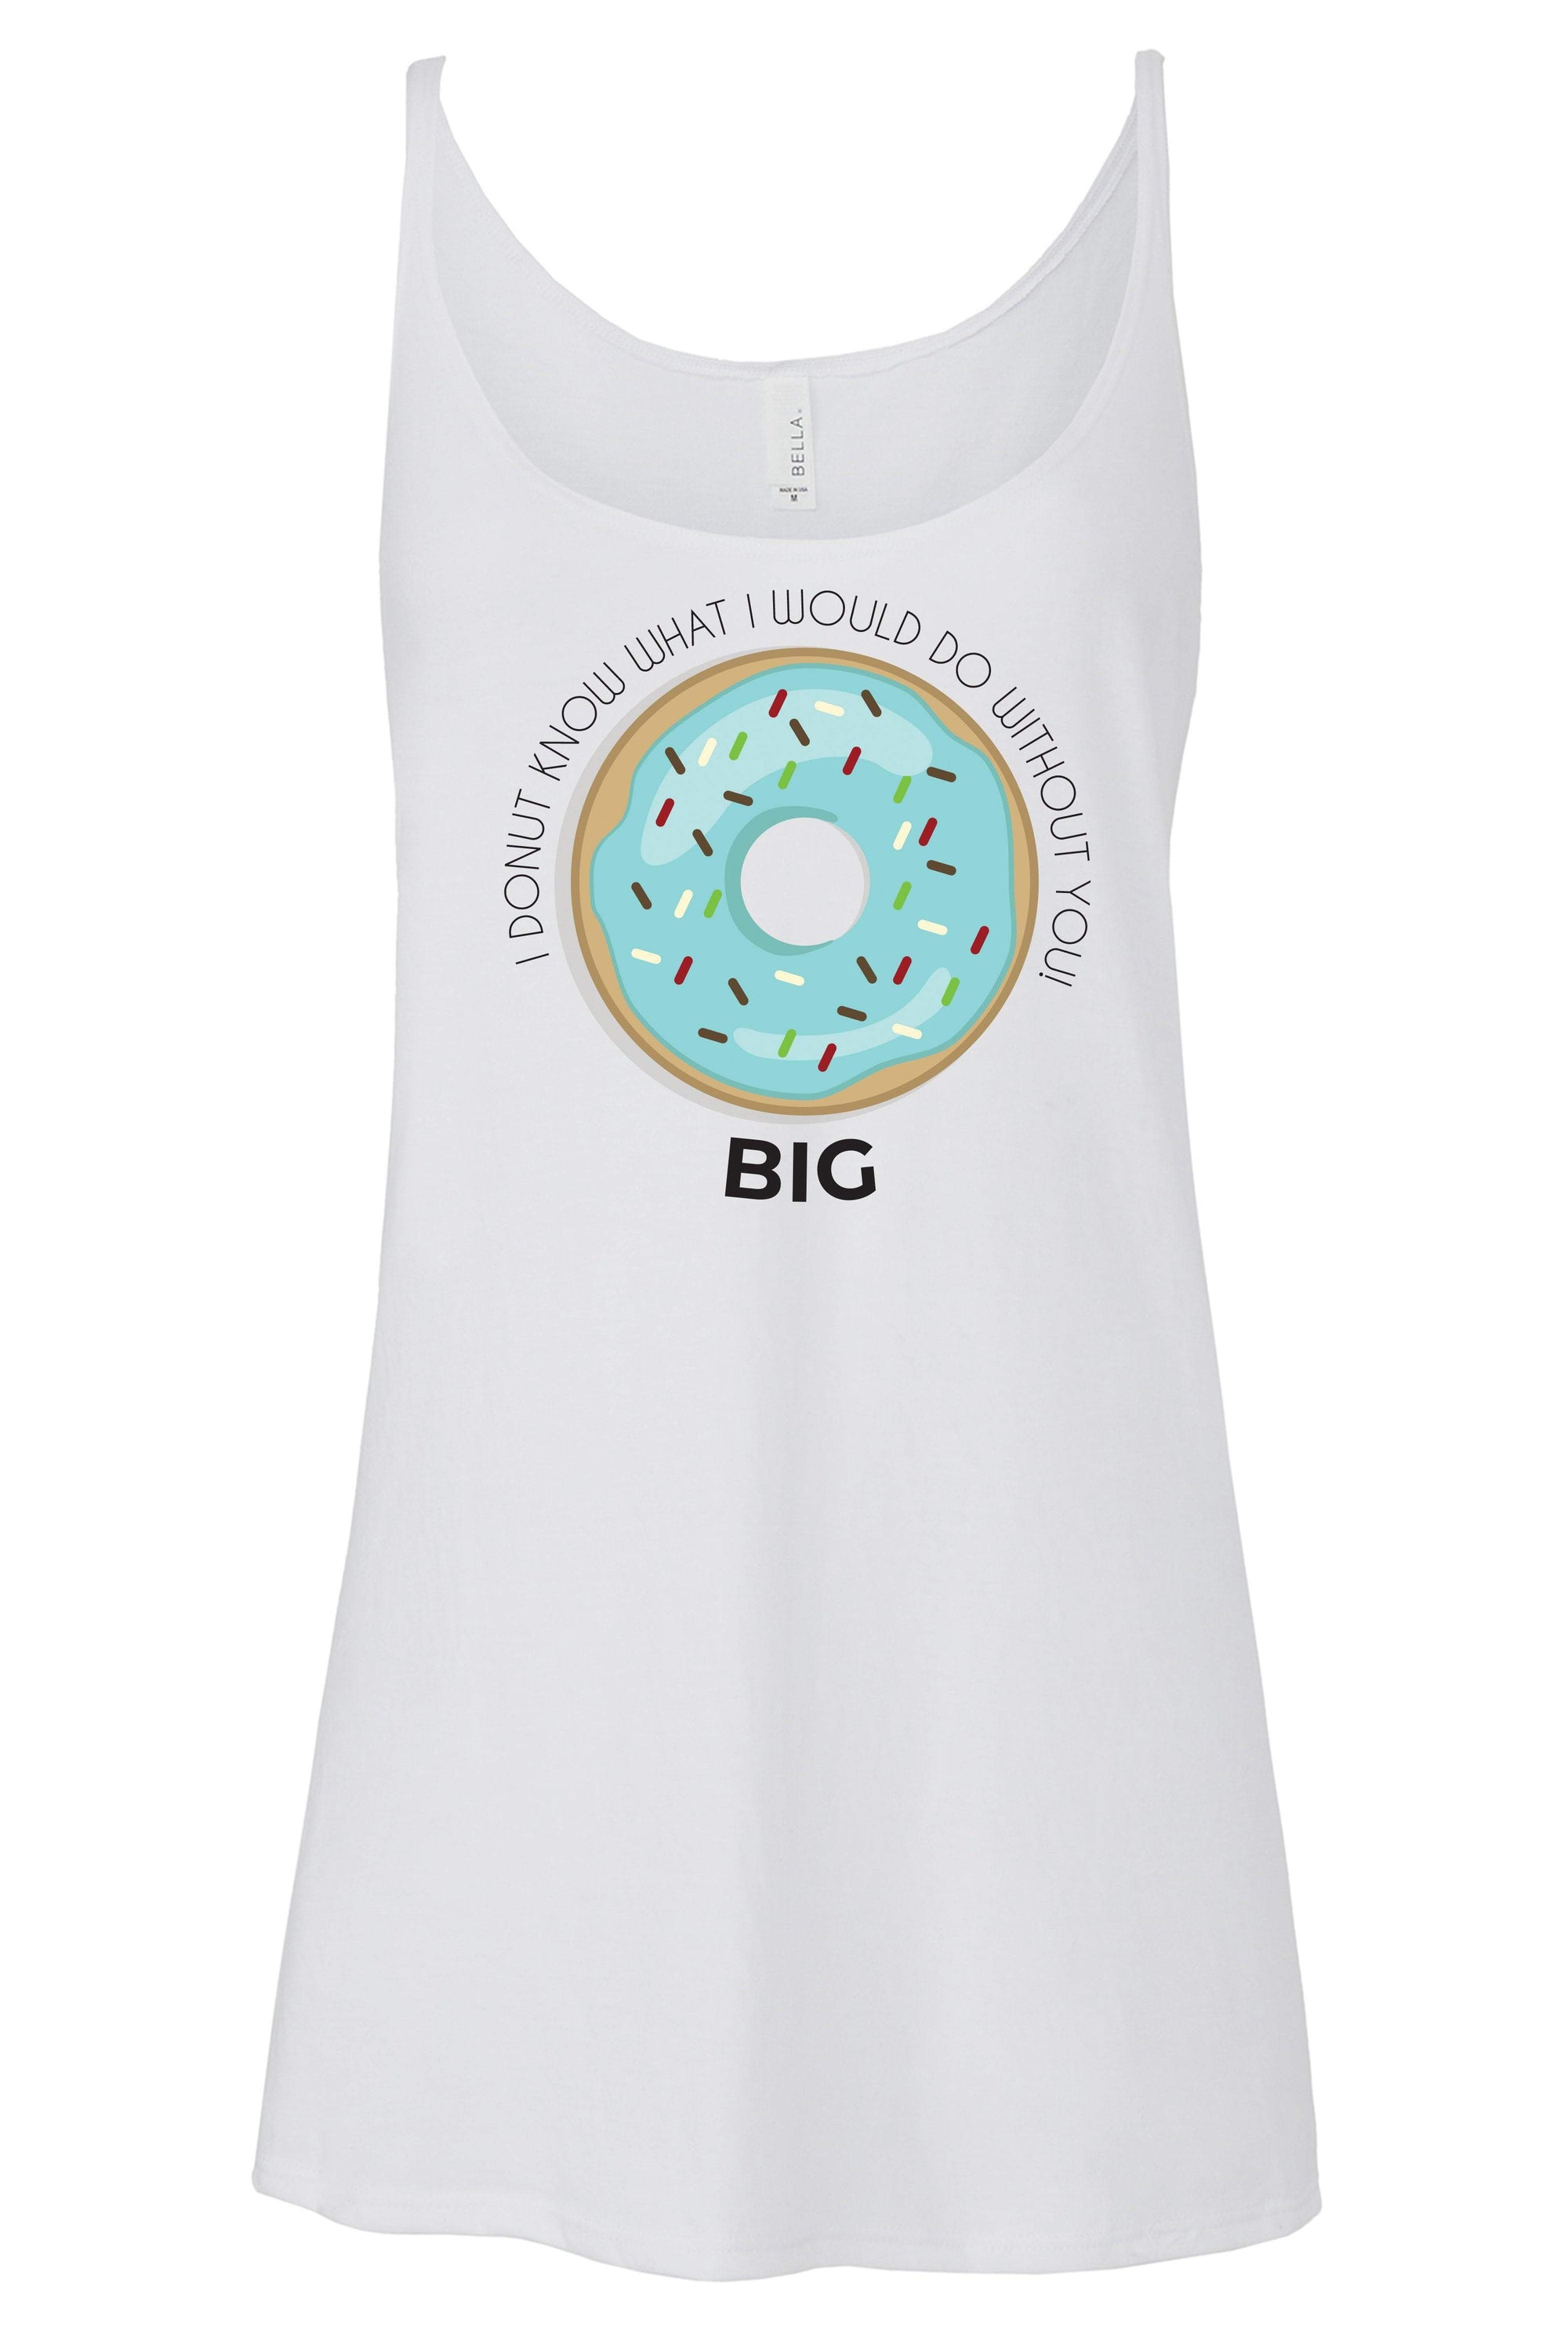 Big Little Donut Tank - Bella Slouchy, Ladies, Sunny and Southern, - Sunny and Southern,